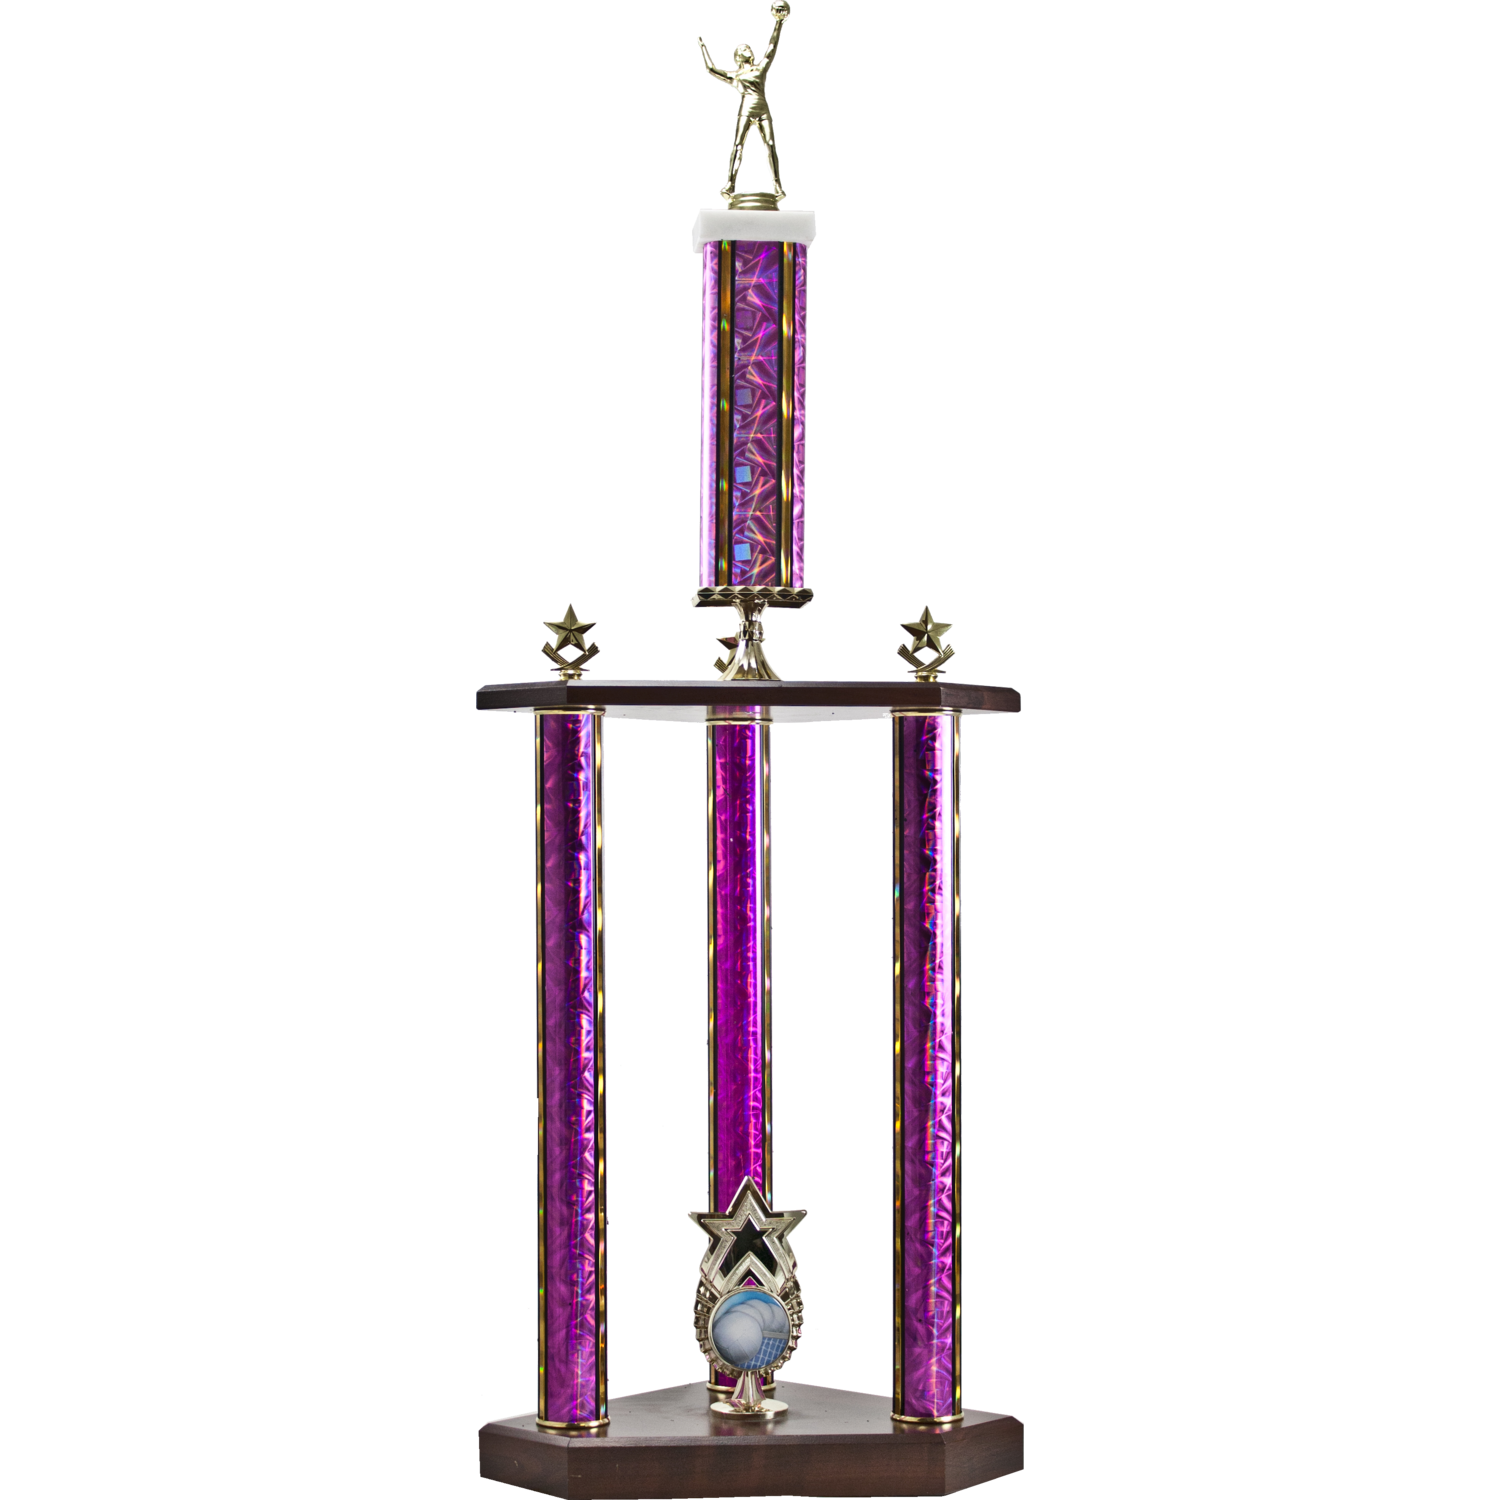 Traditional Series Two-Tier 3 Post Trophy With Star "Exclusive" Star | Alliance Awards LLC.